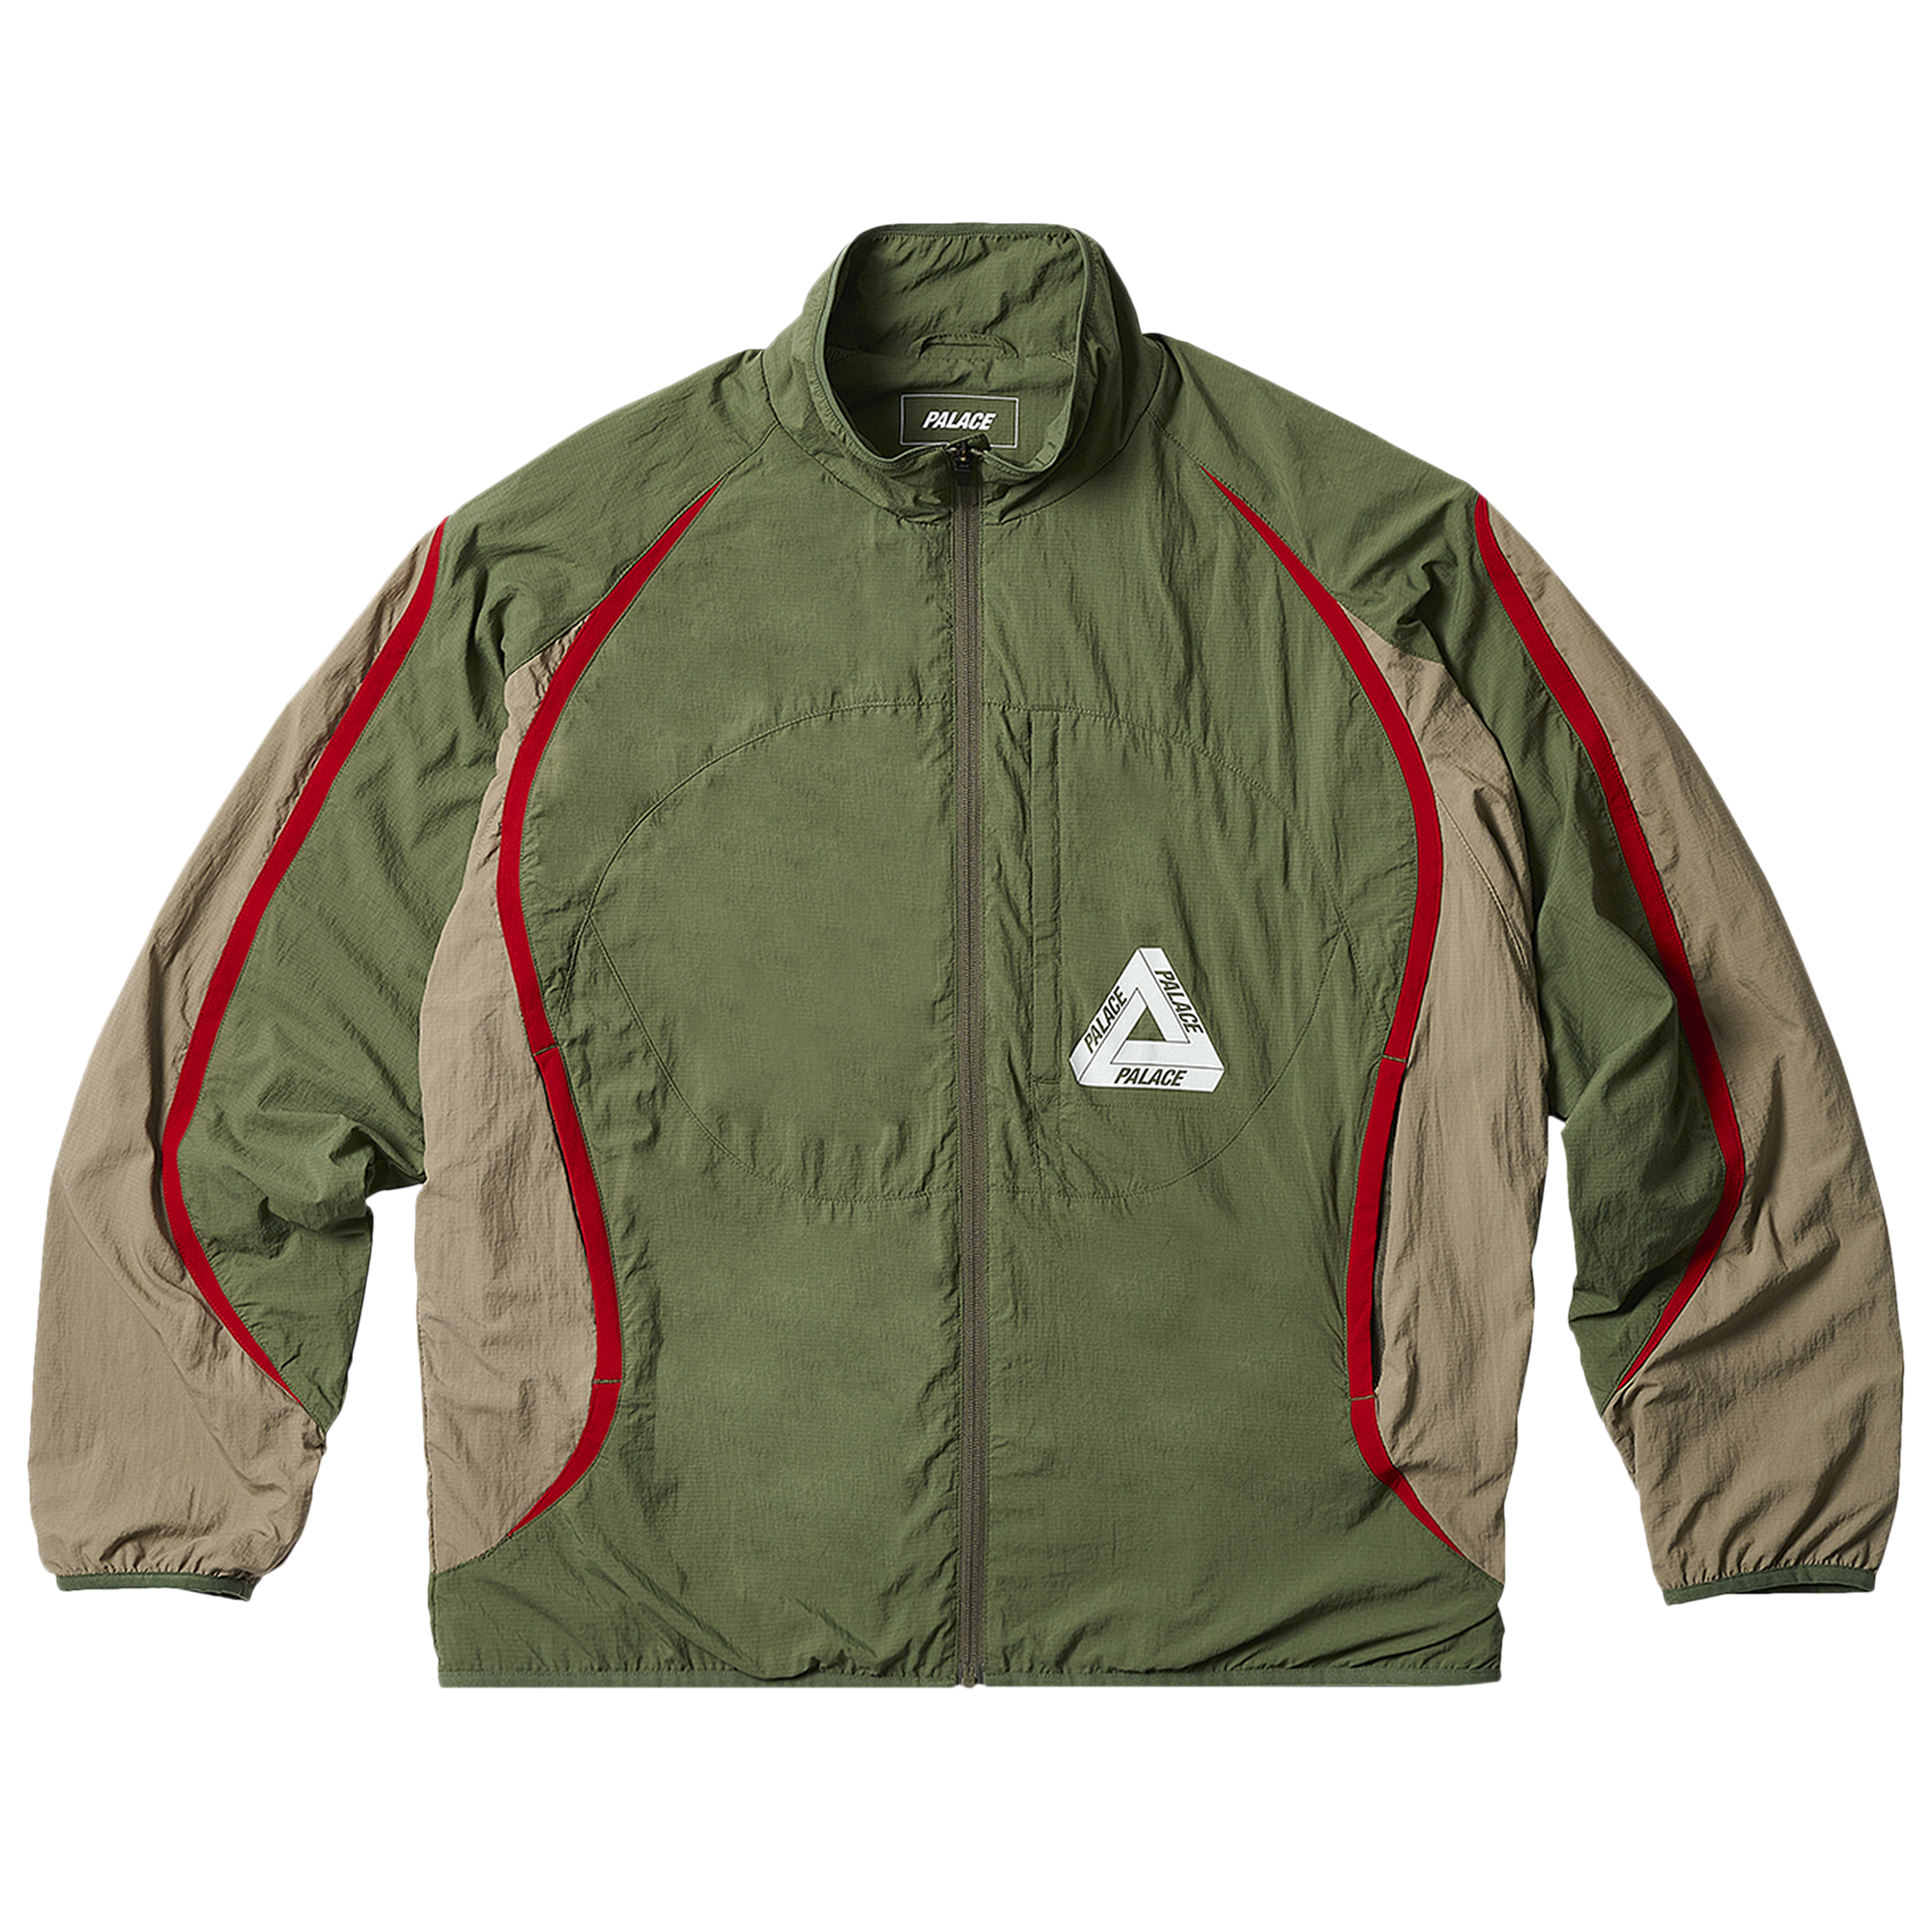 Pre-Owned & Vintage PALACE Jackets for Men